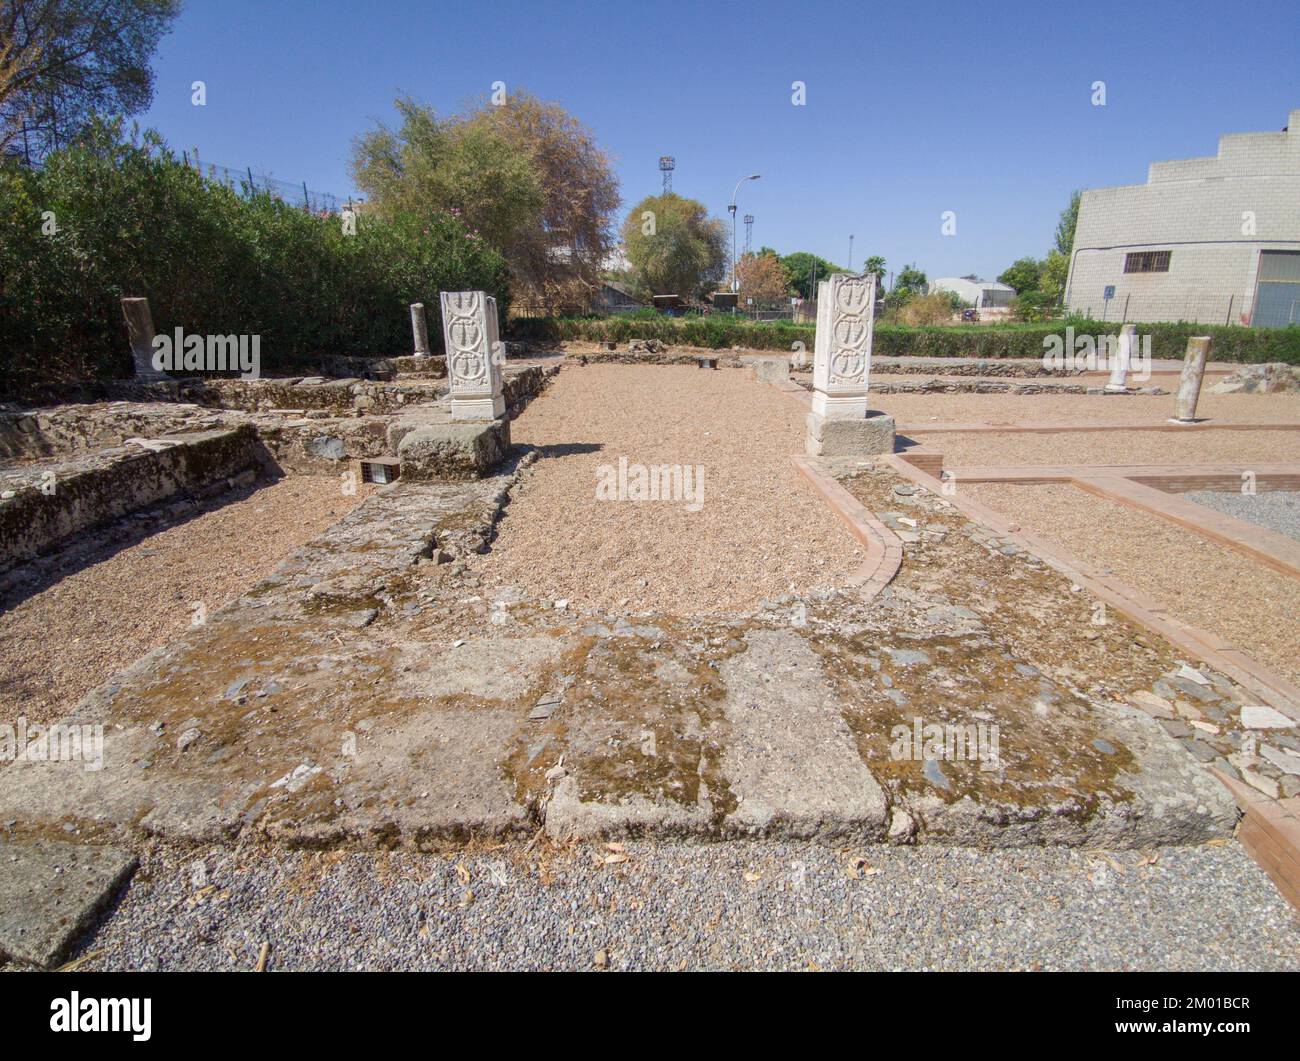 Hospital-Guesthouse archeological remains, Merida, Spain. 6th Century AC building from vsigothic times. Stock Photo